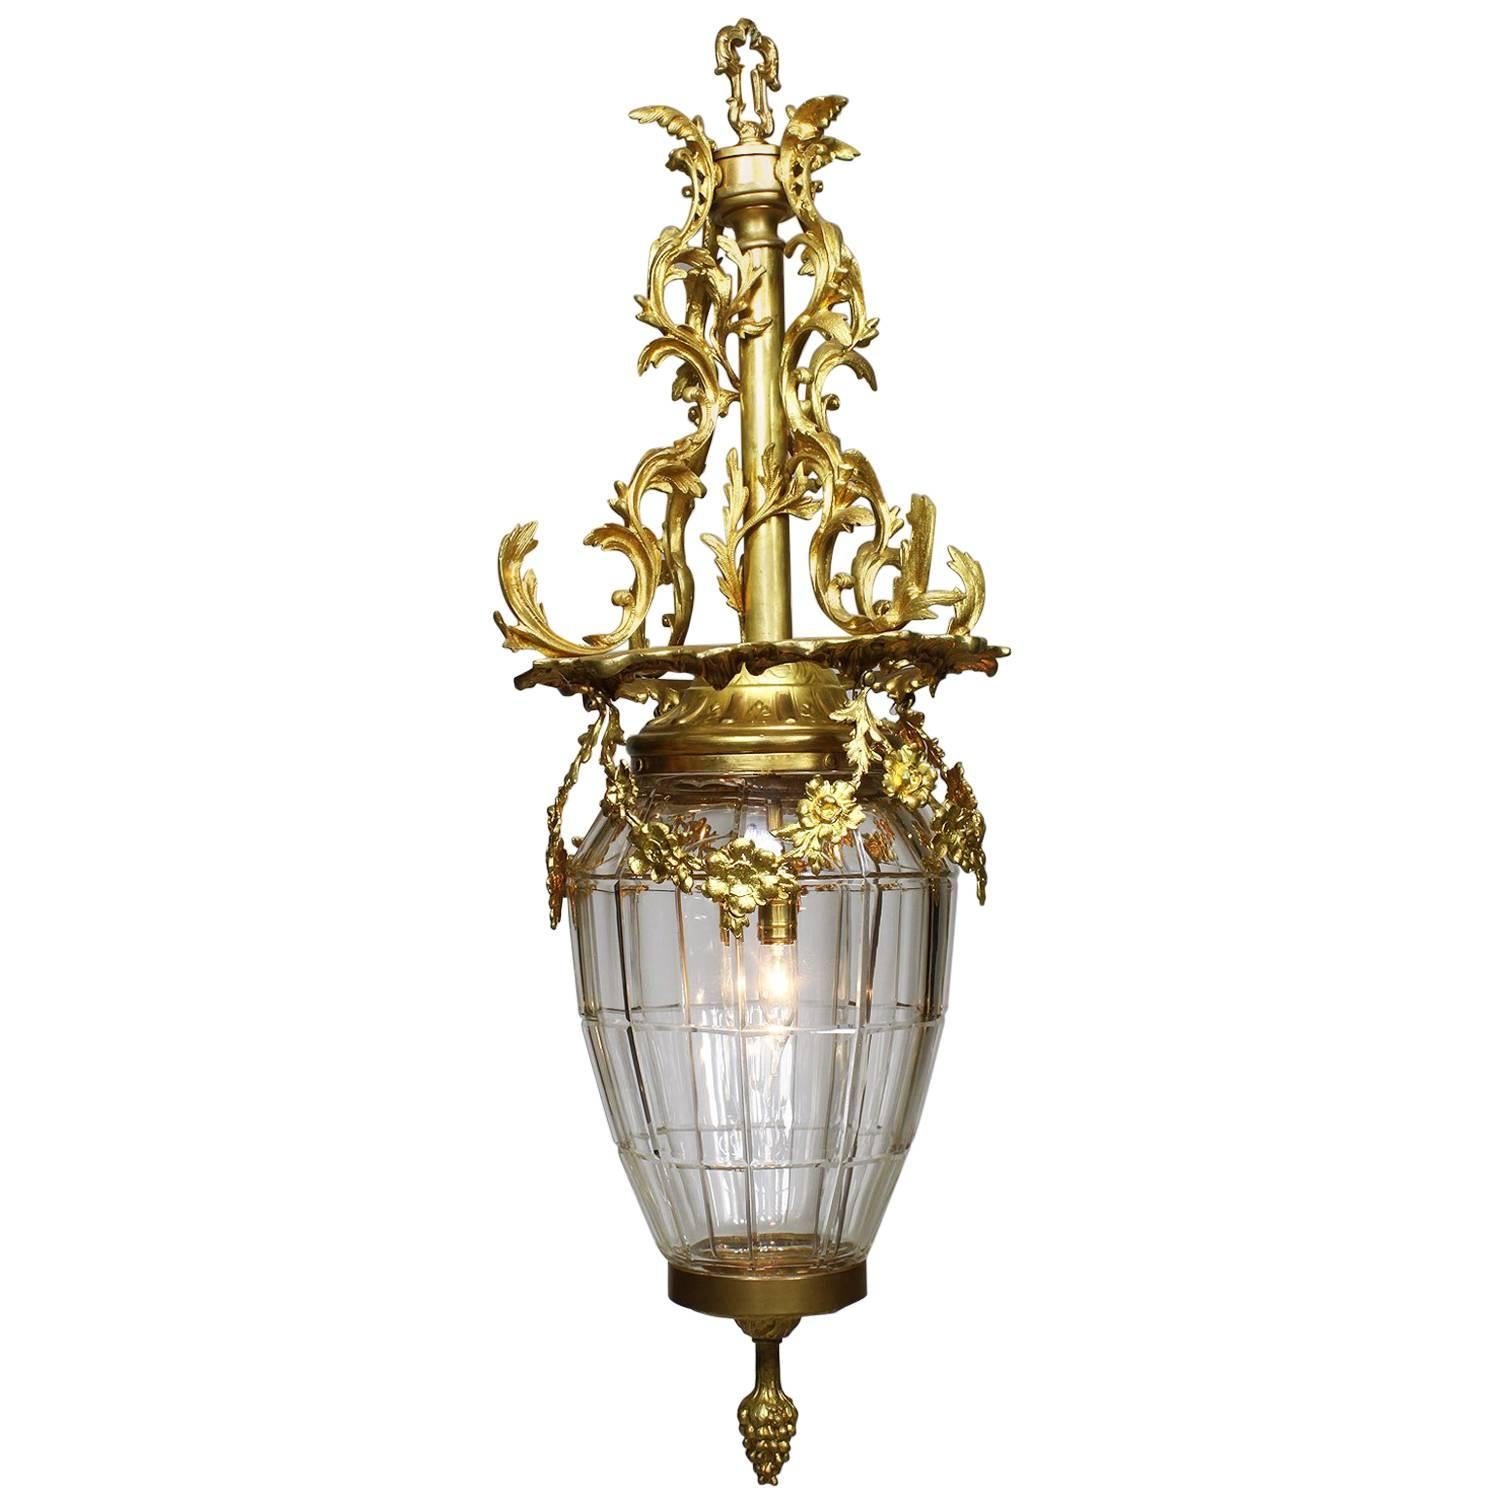 French 19th-20th Century Gilt-Bronze and Molded Glass "Versailles" Style Lantern For Sale